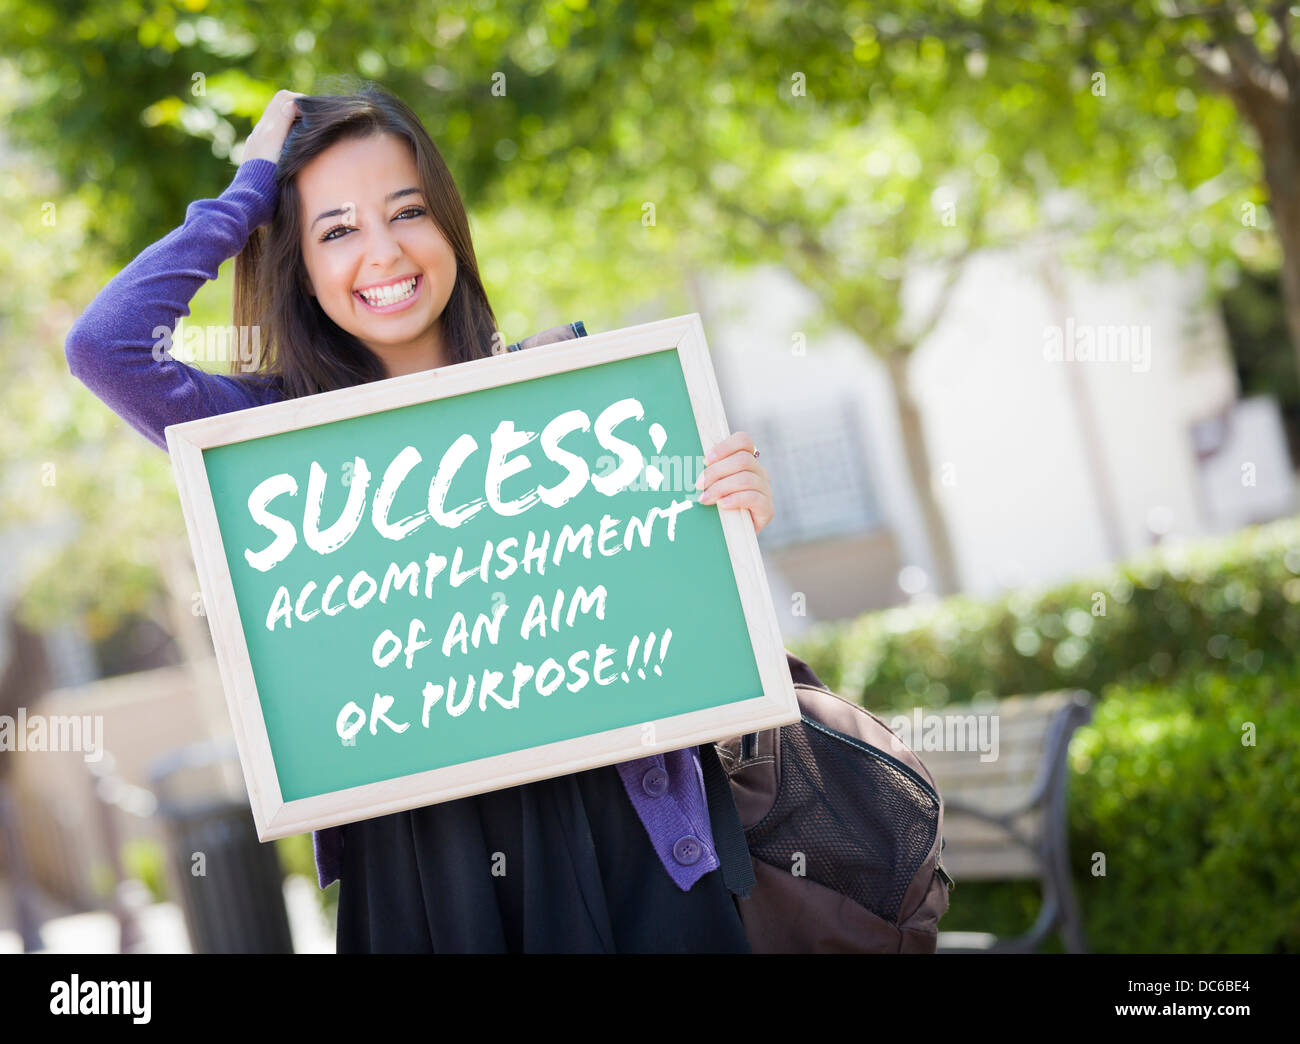 Excited Mixed Race Female Student Holding Chalkboard With Success and the Definition Written on it. Stock Photo